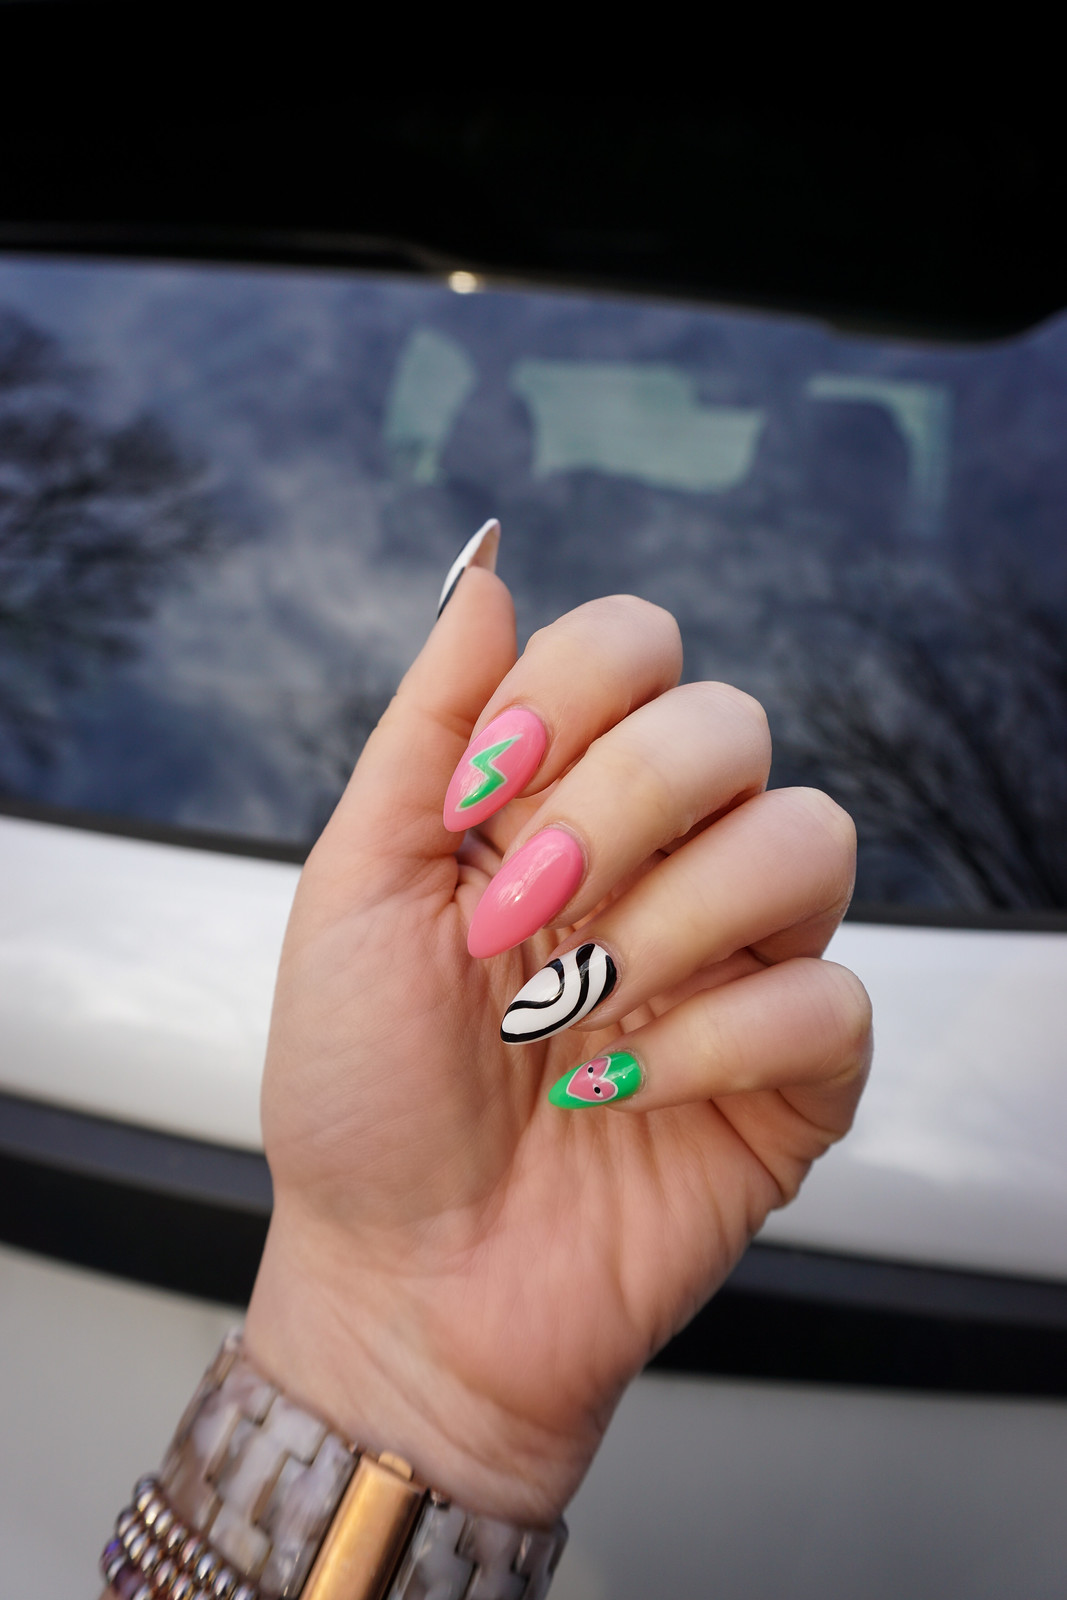 Bring on the summer! Fun nail art design with OPI Brazil - Lucy's Stash